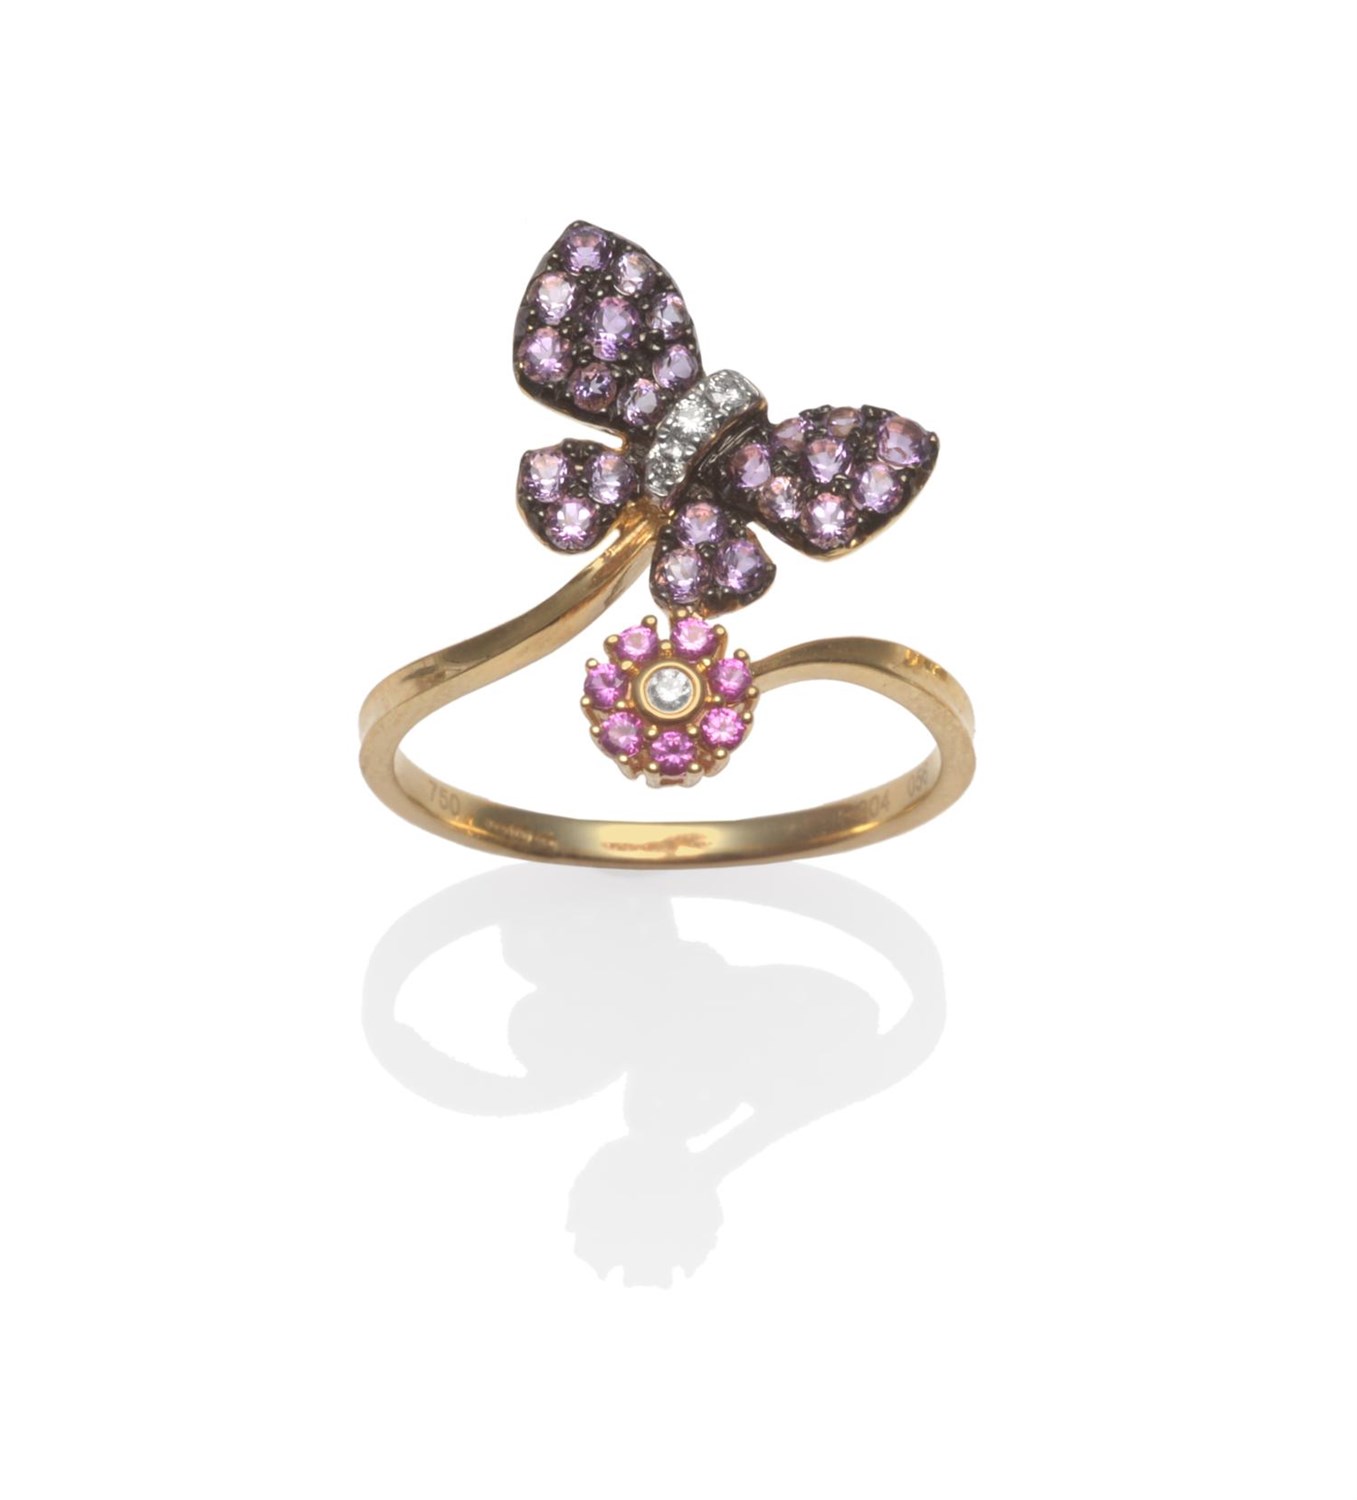 Lot 2006 - An 18 Carat Gold Diamond, Pink Sapphire and Amethyst Ring, modelled as a butterfly and flower, on a